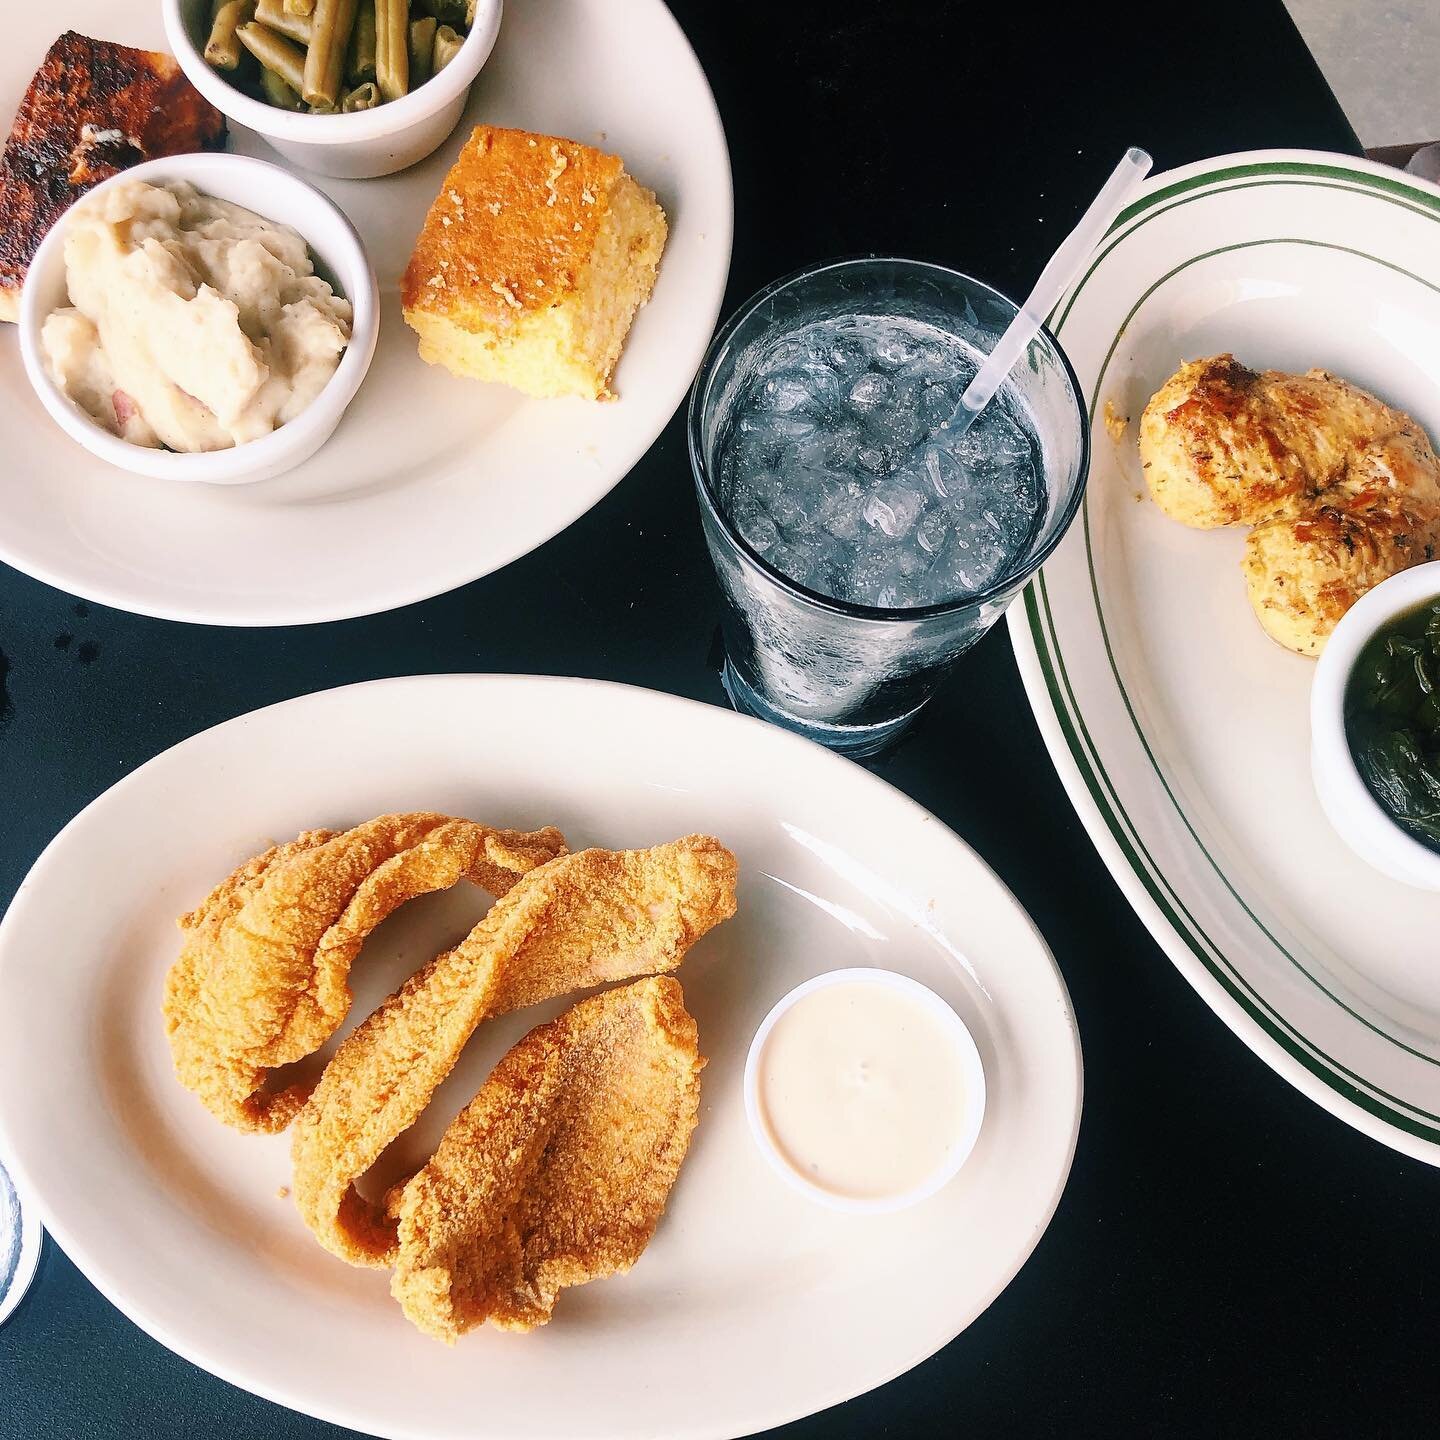 This week&rsquo;s #ourjacksontable is Americana Kitchen &amp; Grille, one of our newest local restaurants, which opened just a month before COVID-19 shutdowns. Try their lunch specials all under $10, including a standout catfish filet by head chef Gi